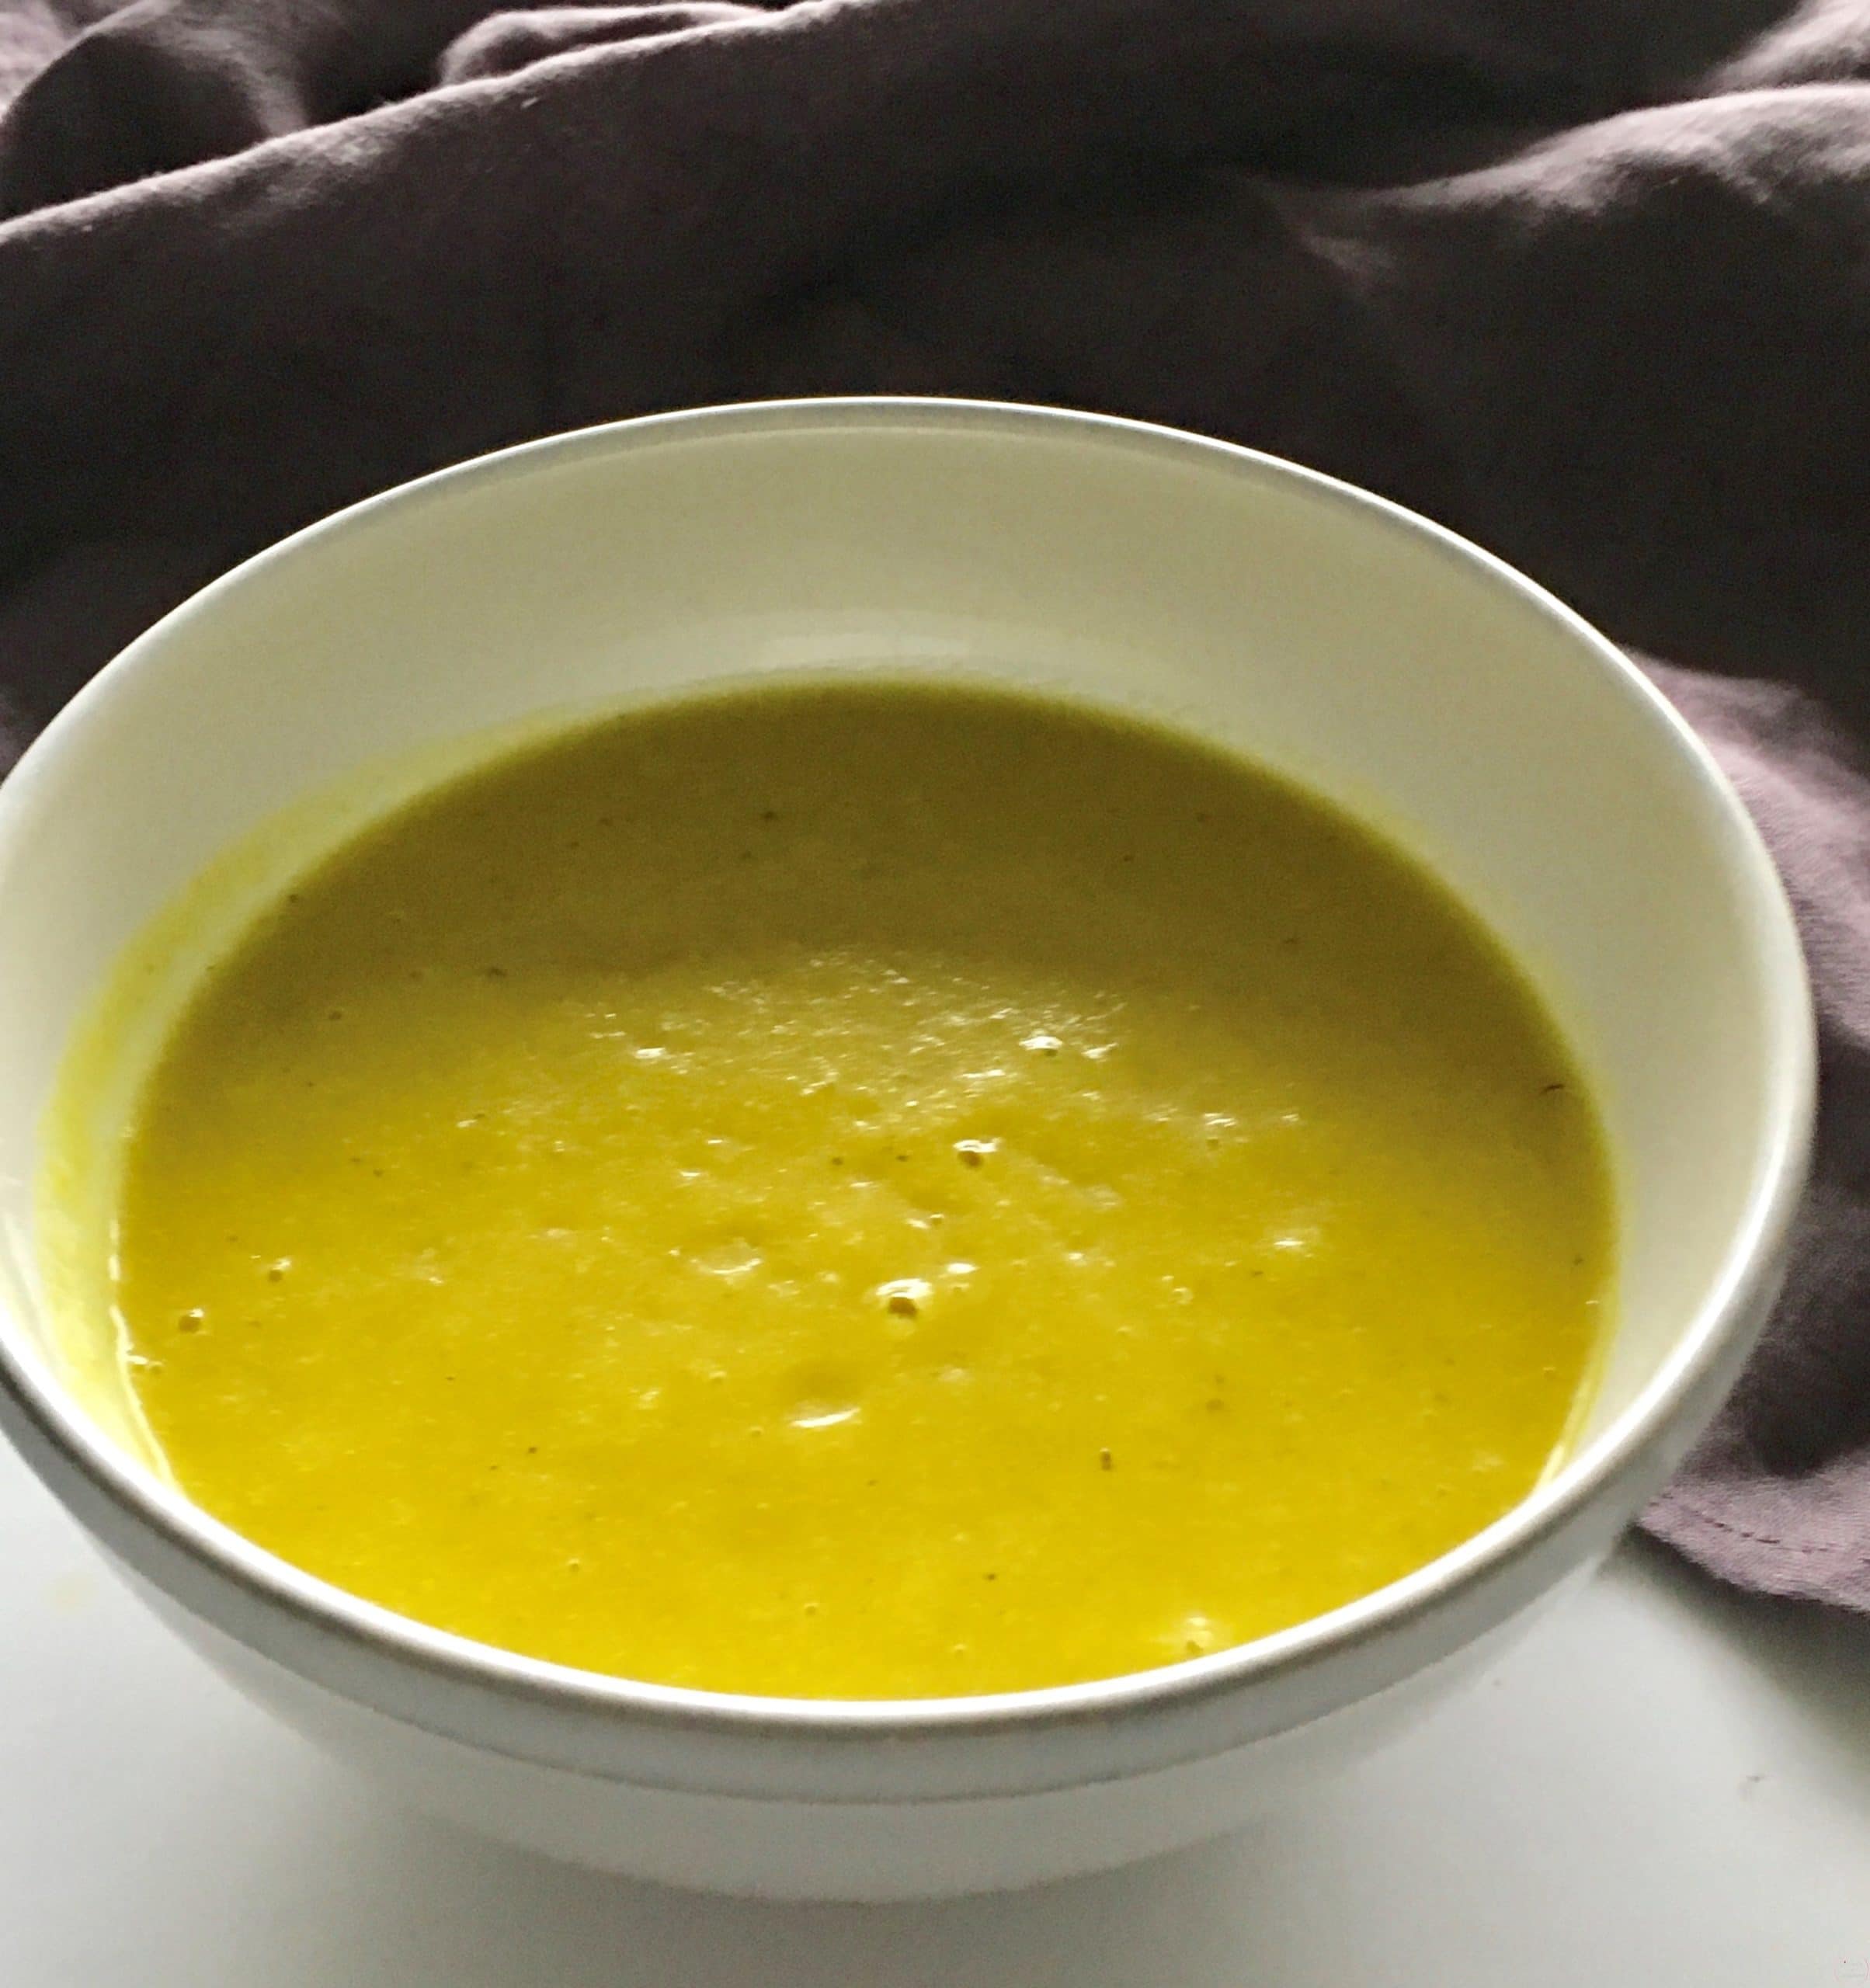 Potage aux oignons - Citronelle and Cardamome